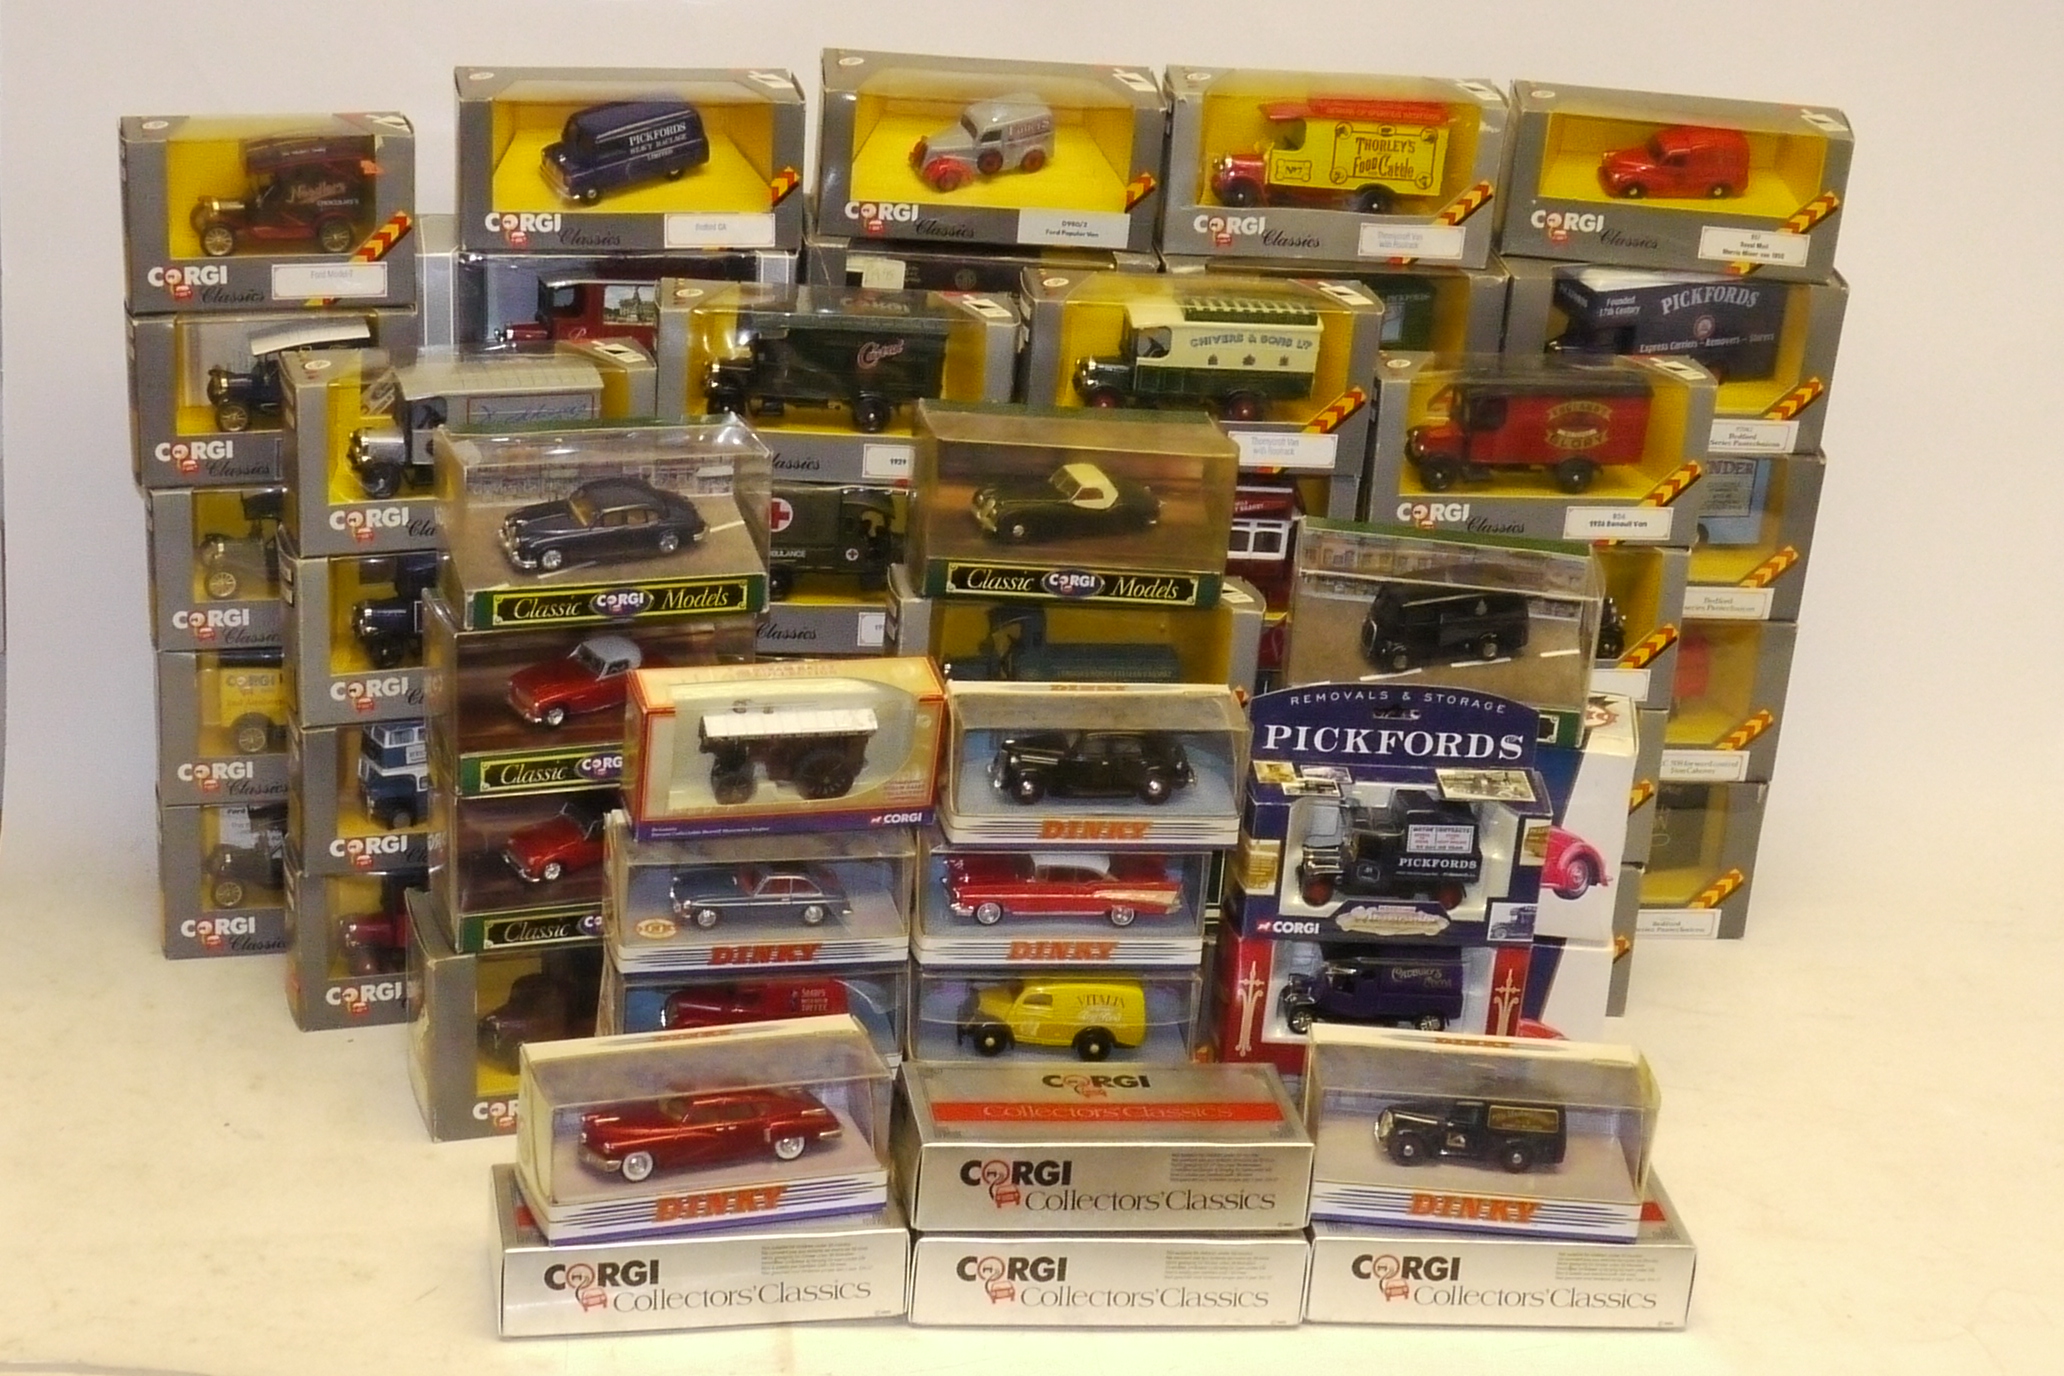 Corgi and Matchbox Models, A boxed collection of 1:43 scale vintage private and commercial